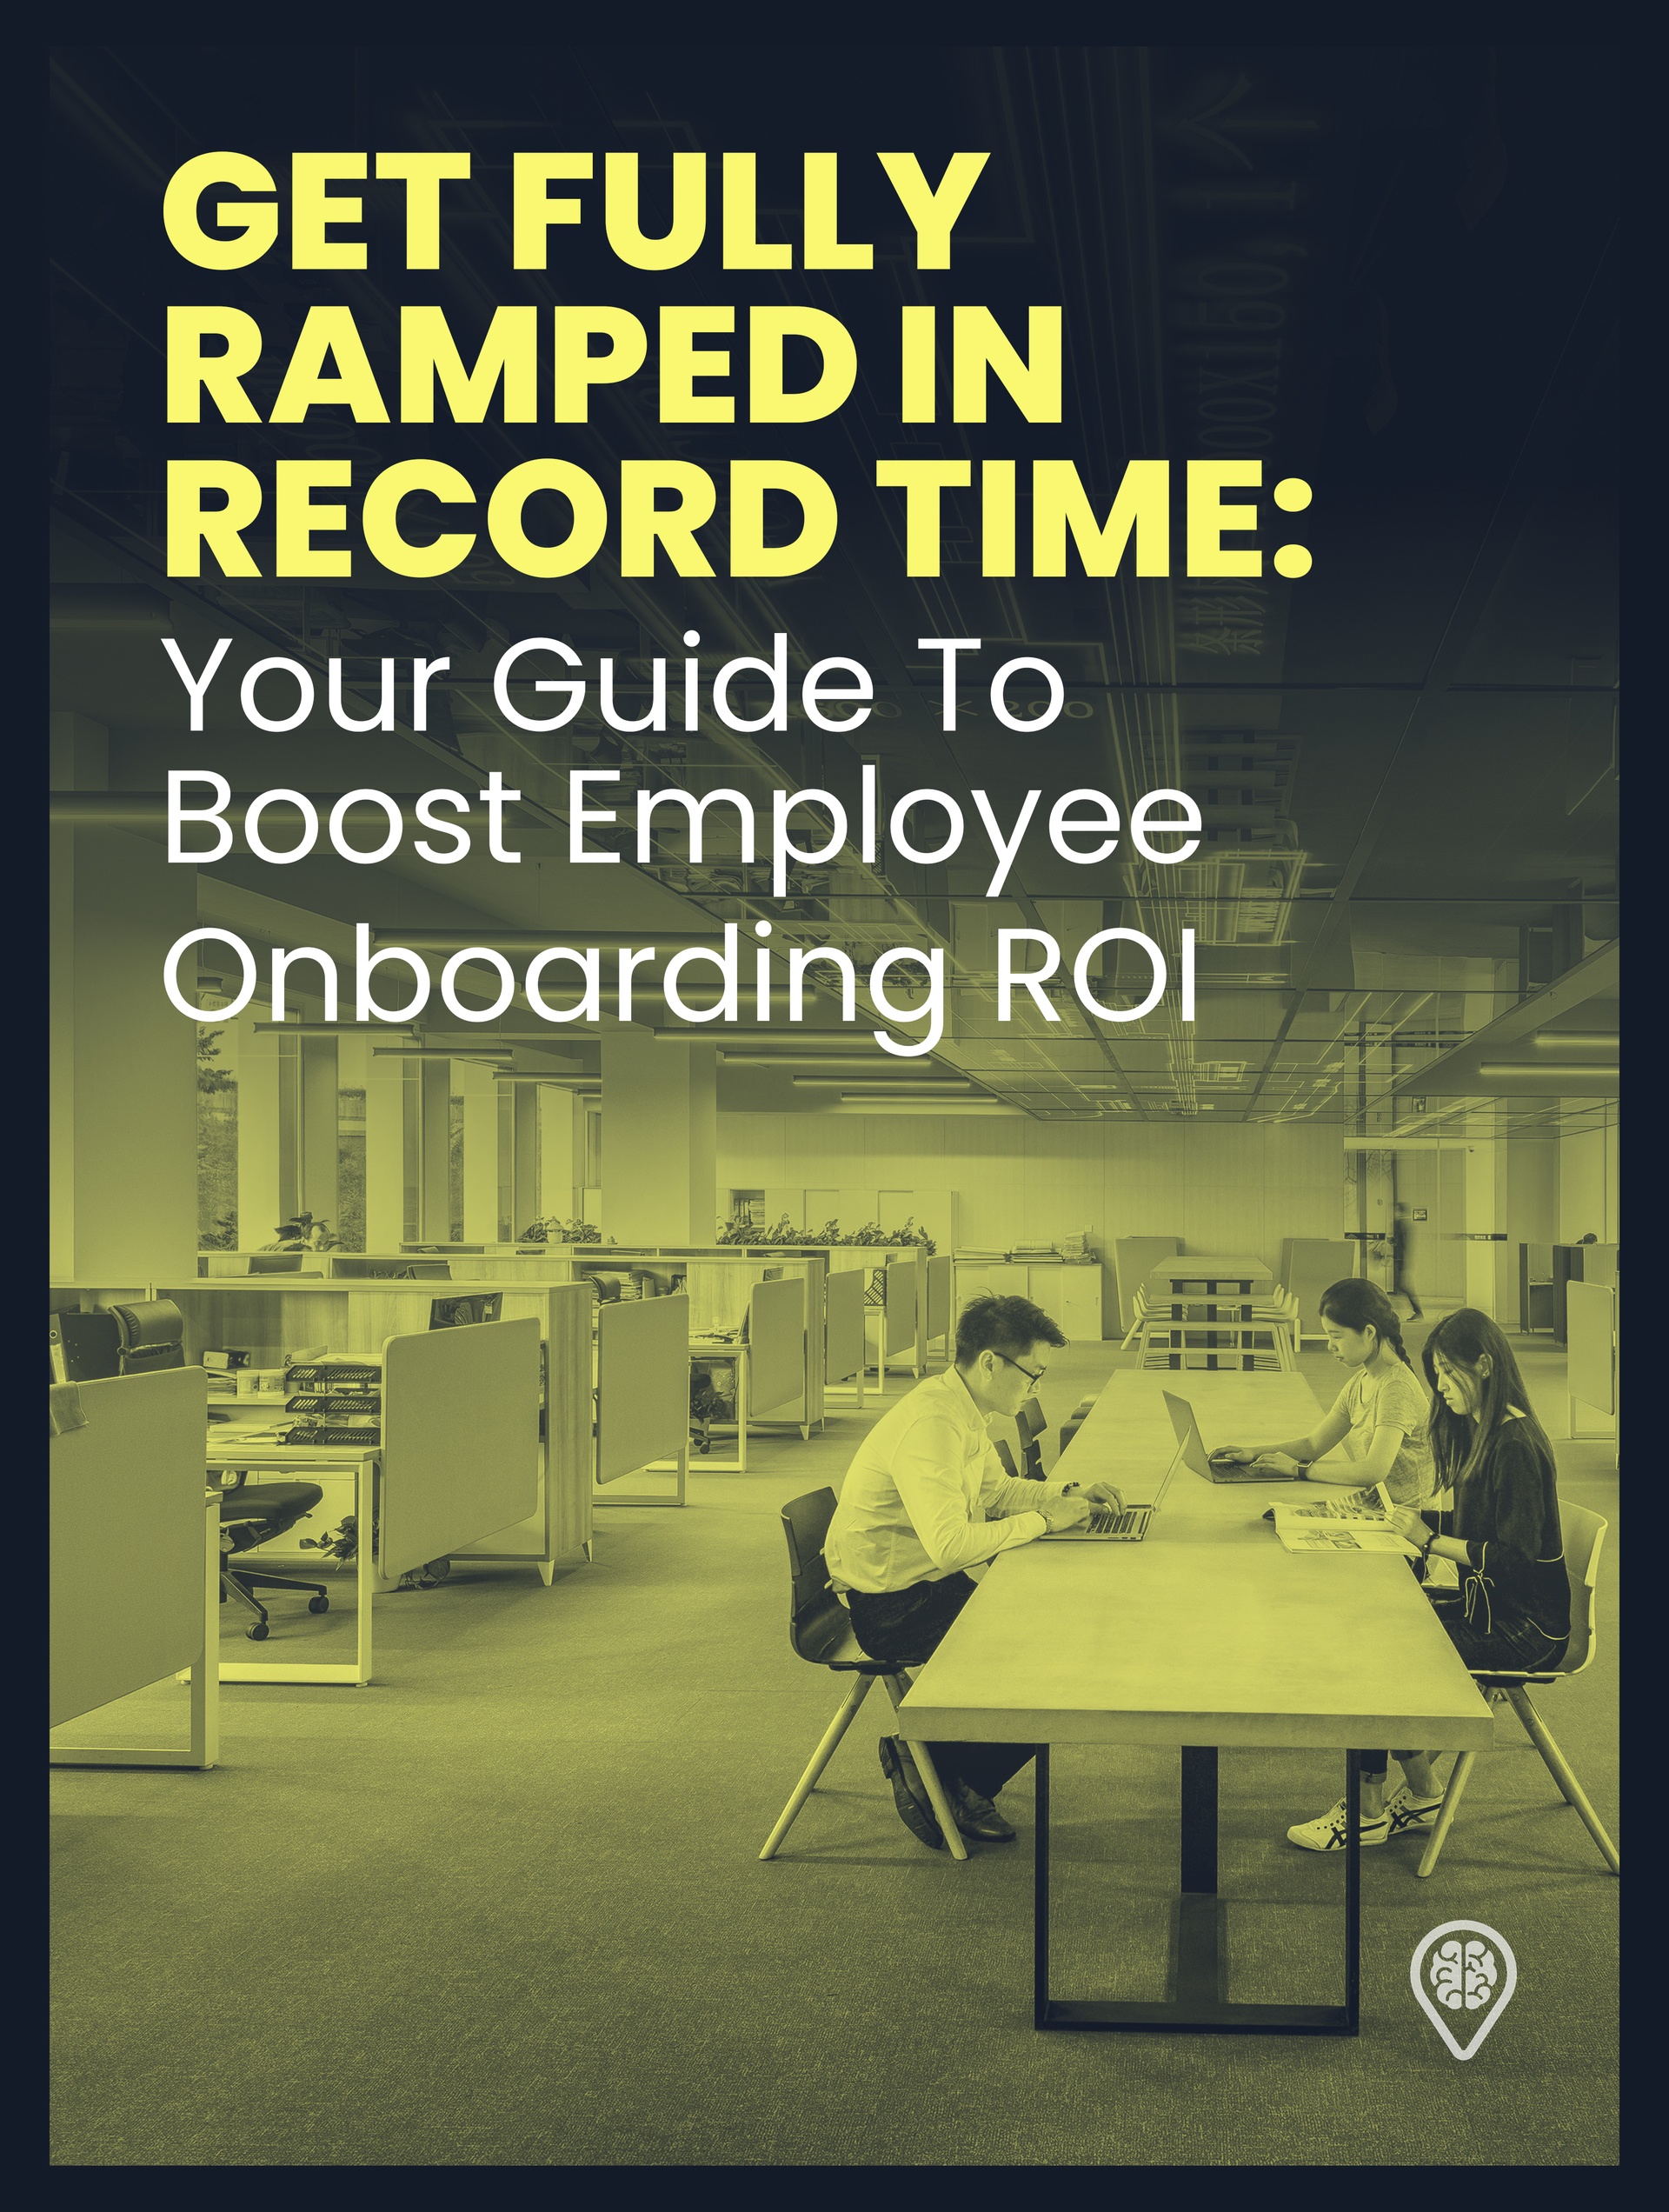 eBook Release: Get Fully Ramped In Record Time: Your Guide To Boost Employee Onboarding ROI